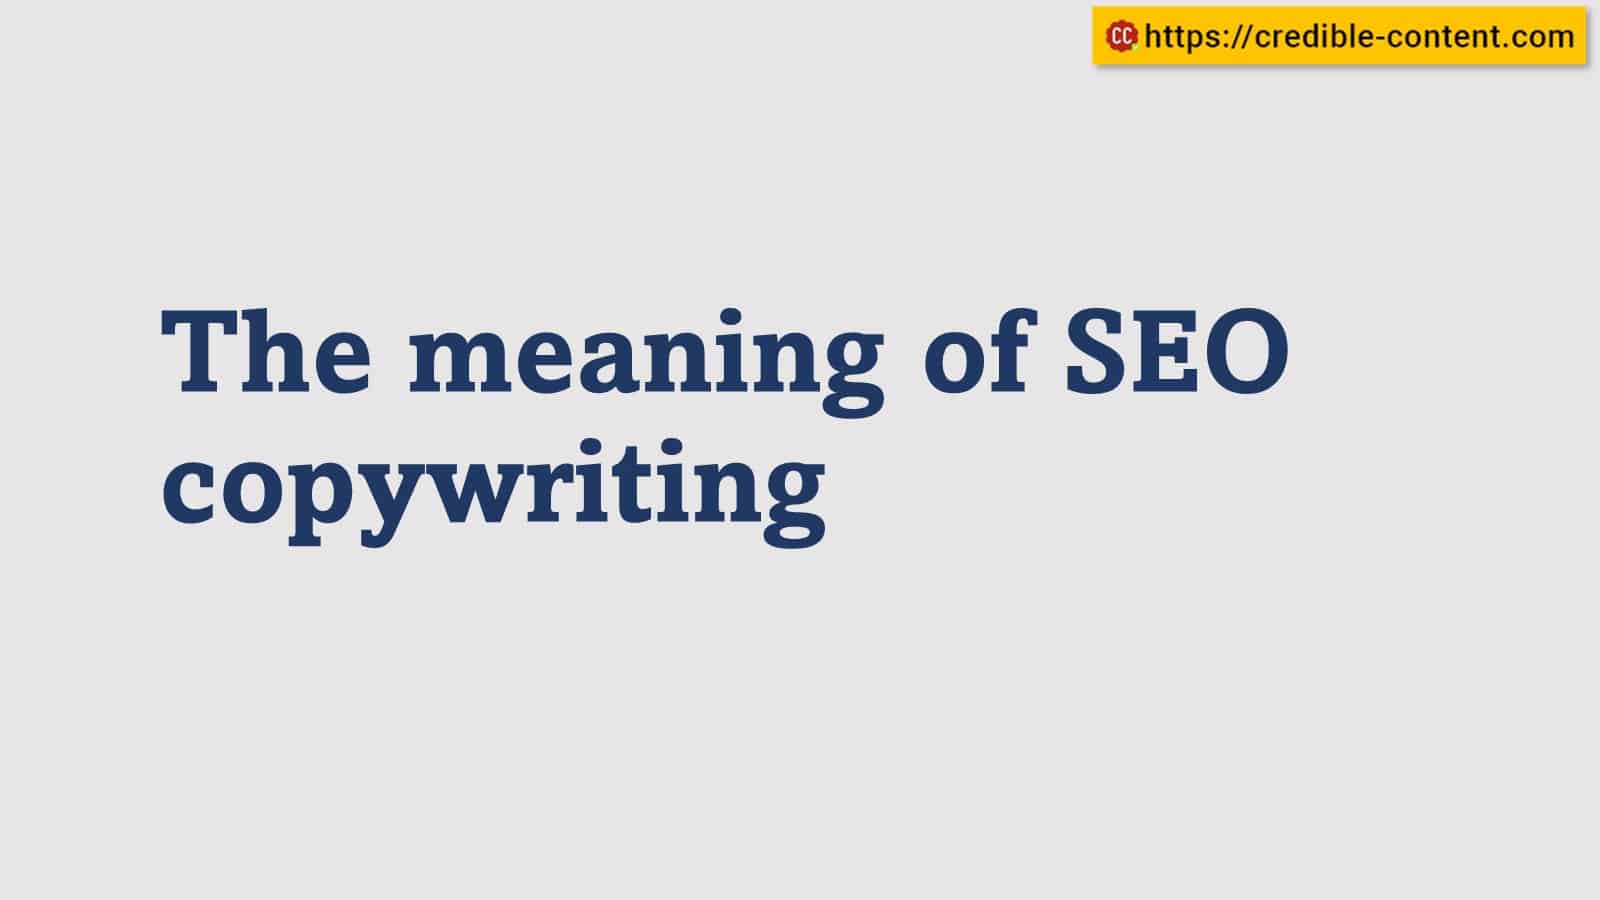 The meaning of SEO copywriting